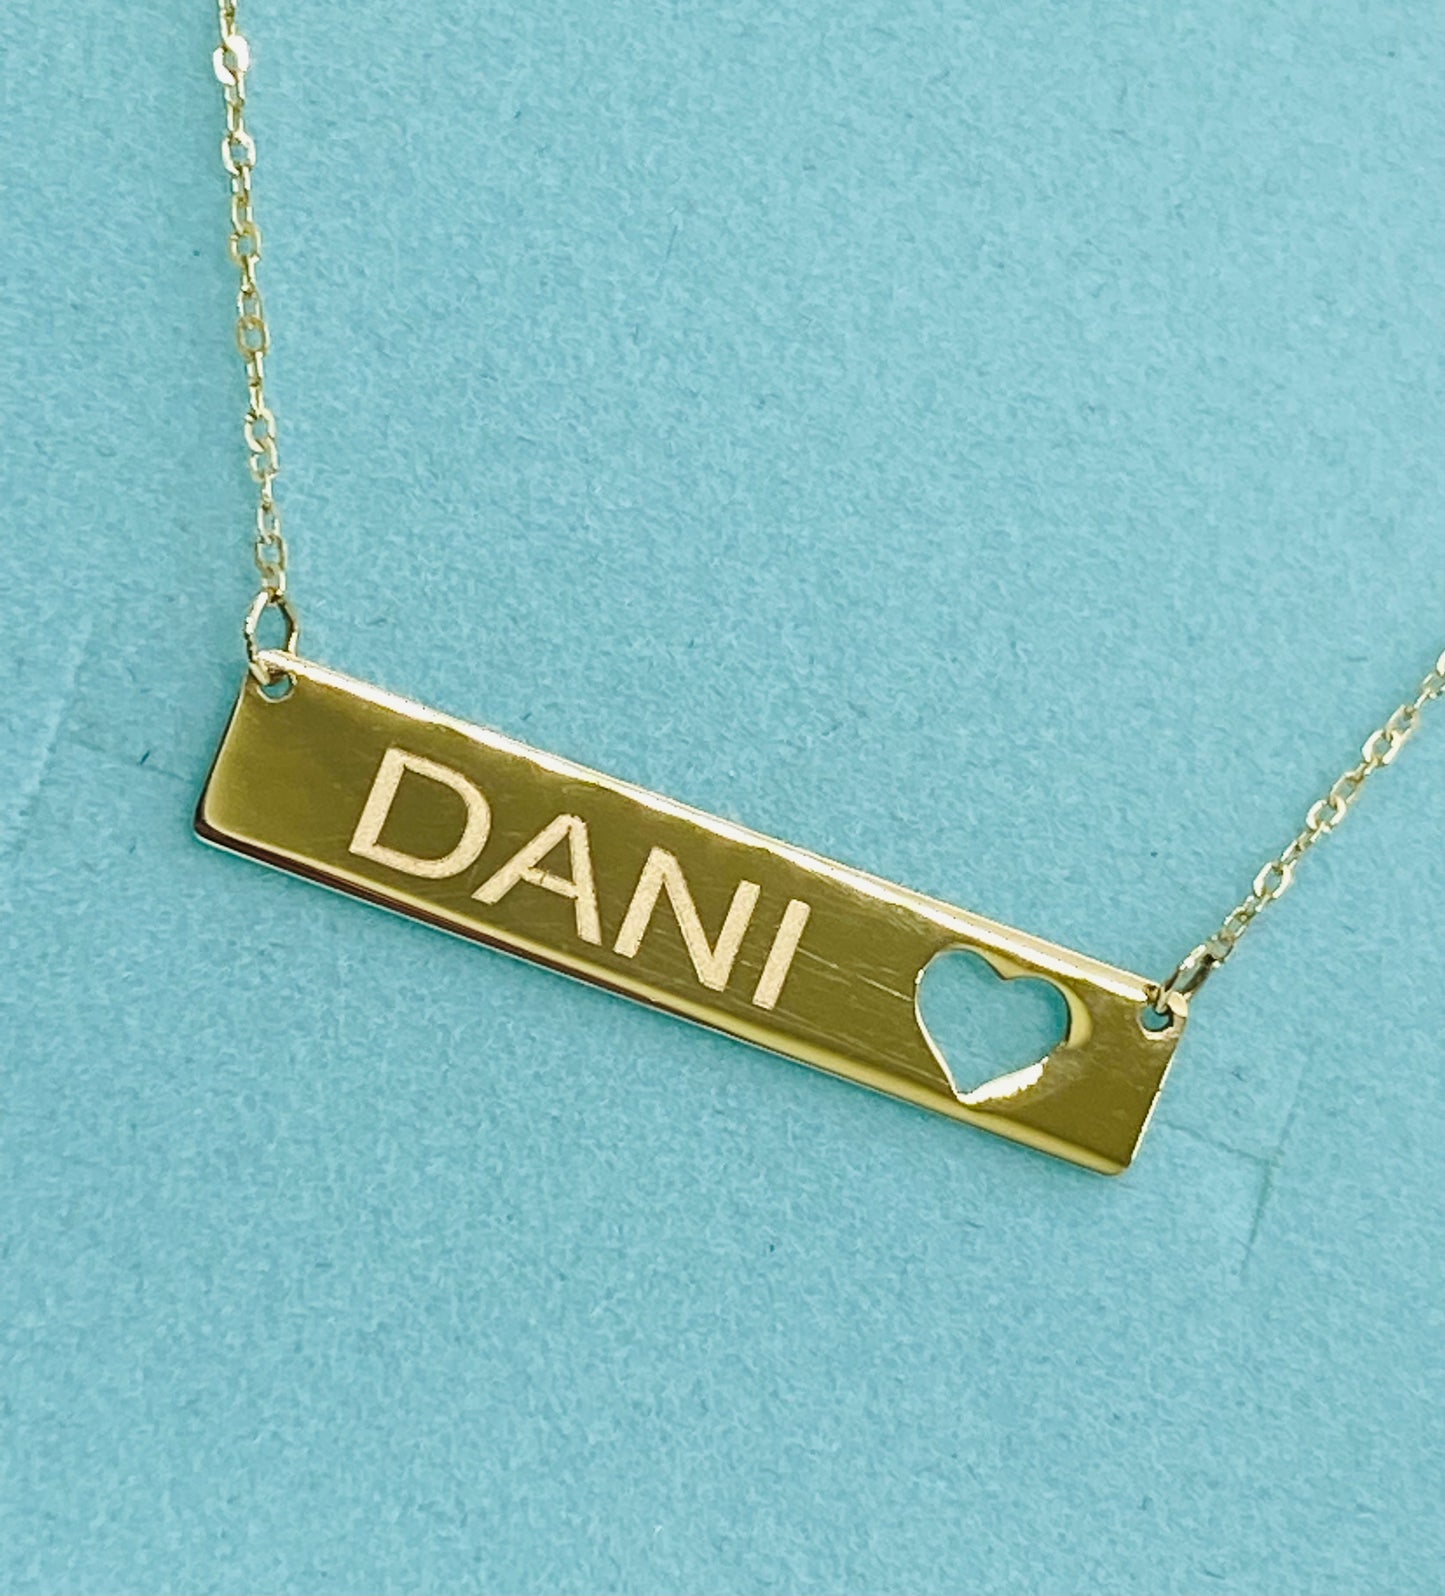 Engravable Plate with Carved-Out Heart Necklace